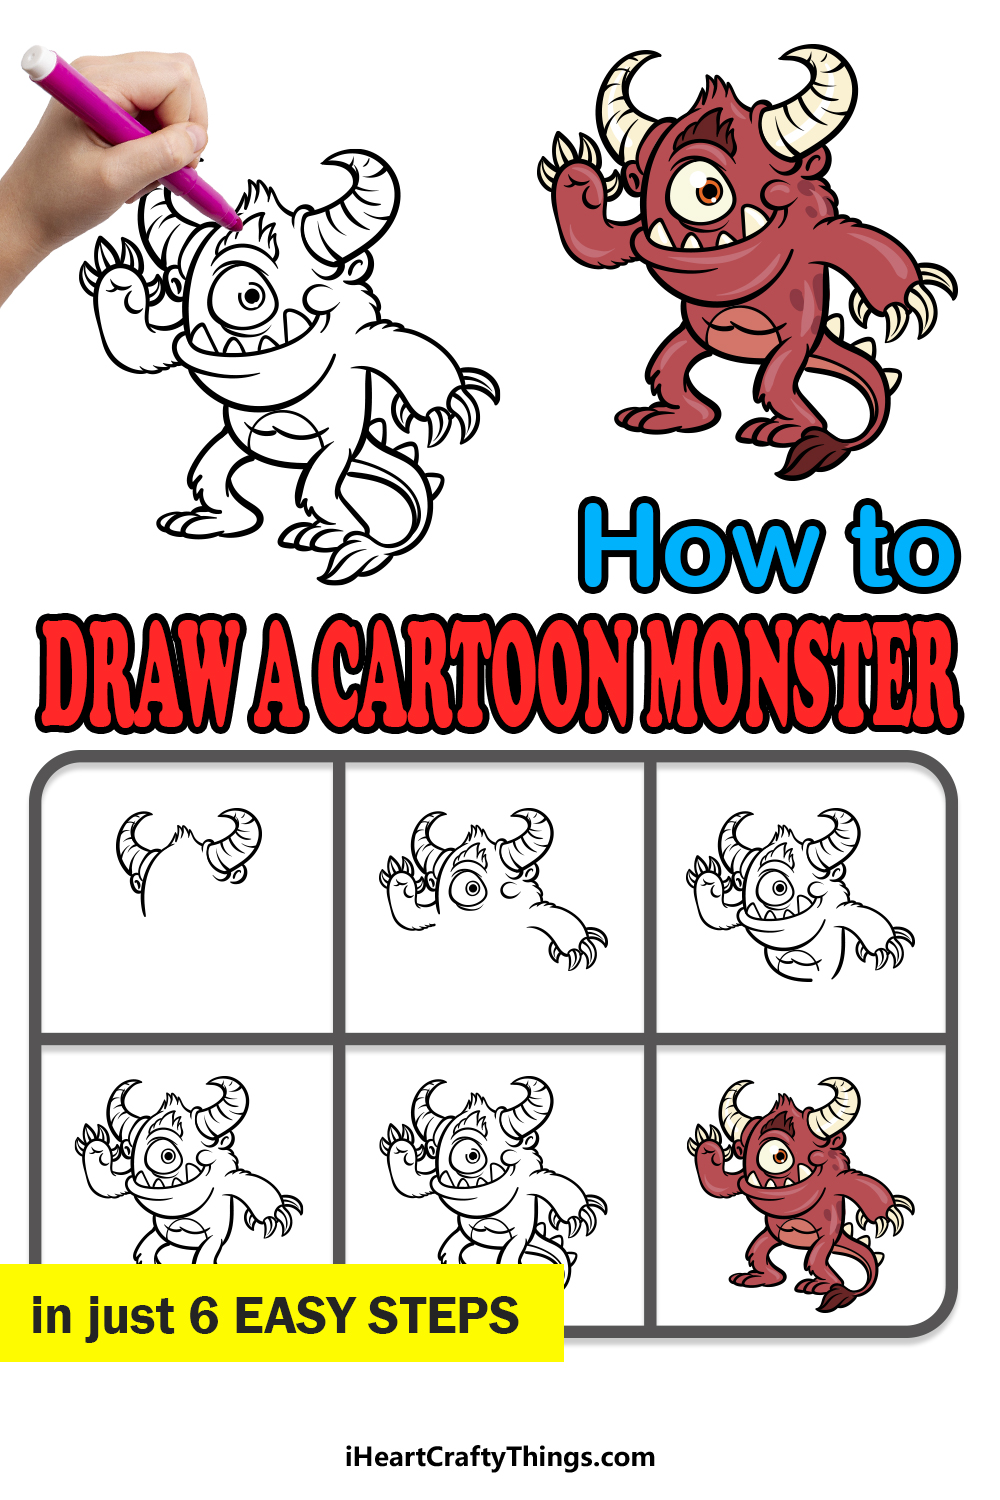 how to draw a cartoon monster in 6 easy steps